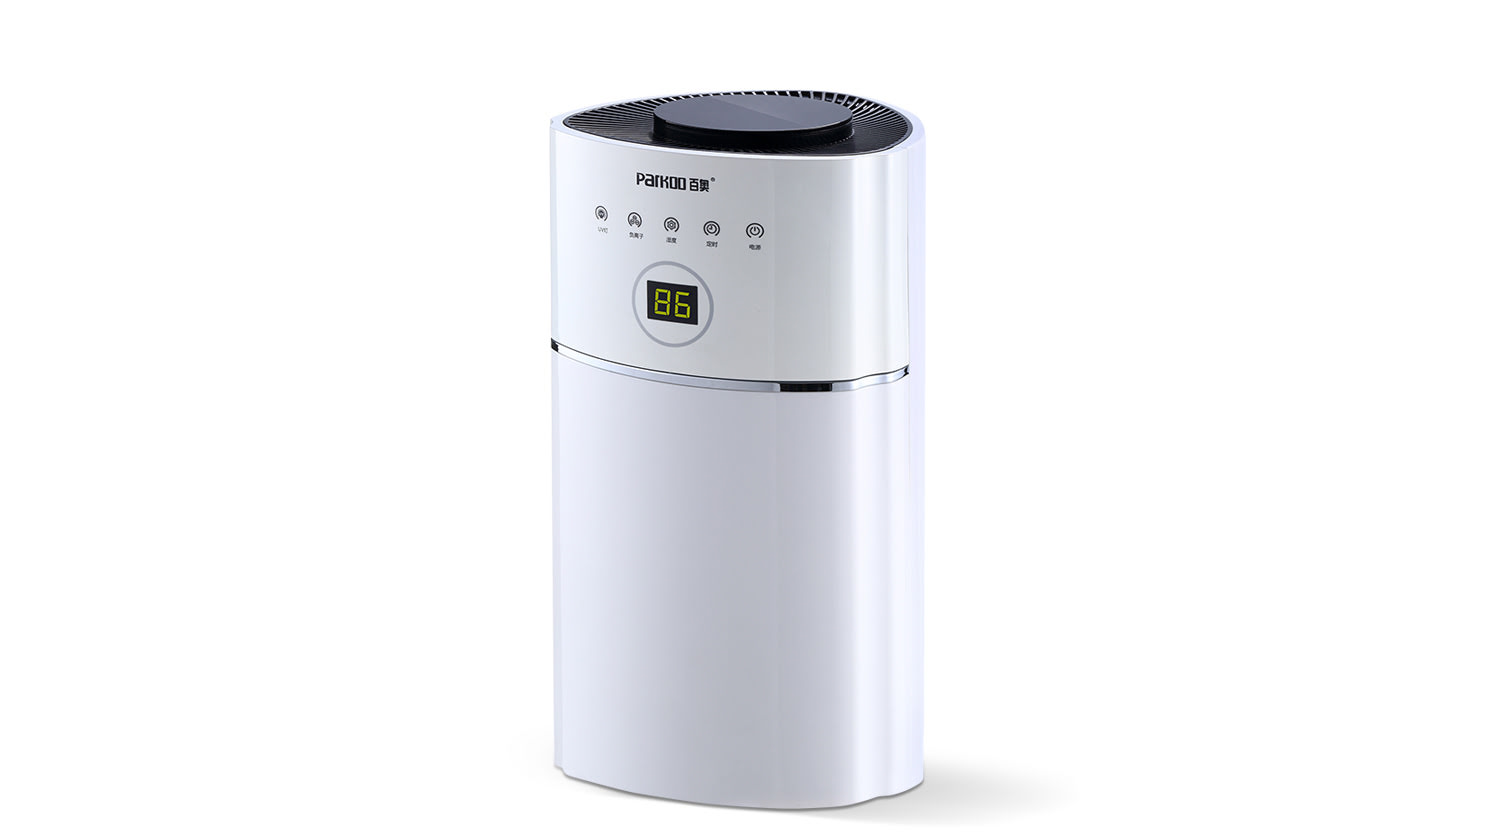 Dehumidifier is used to eliminate humidity, and there is no -wet- indoor self ventilation